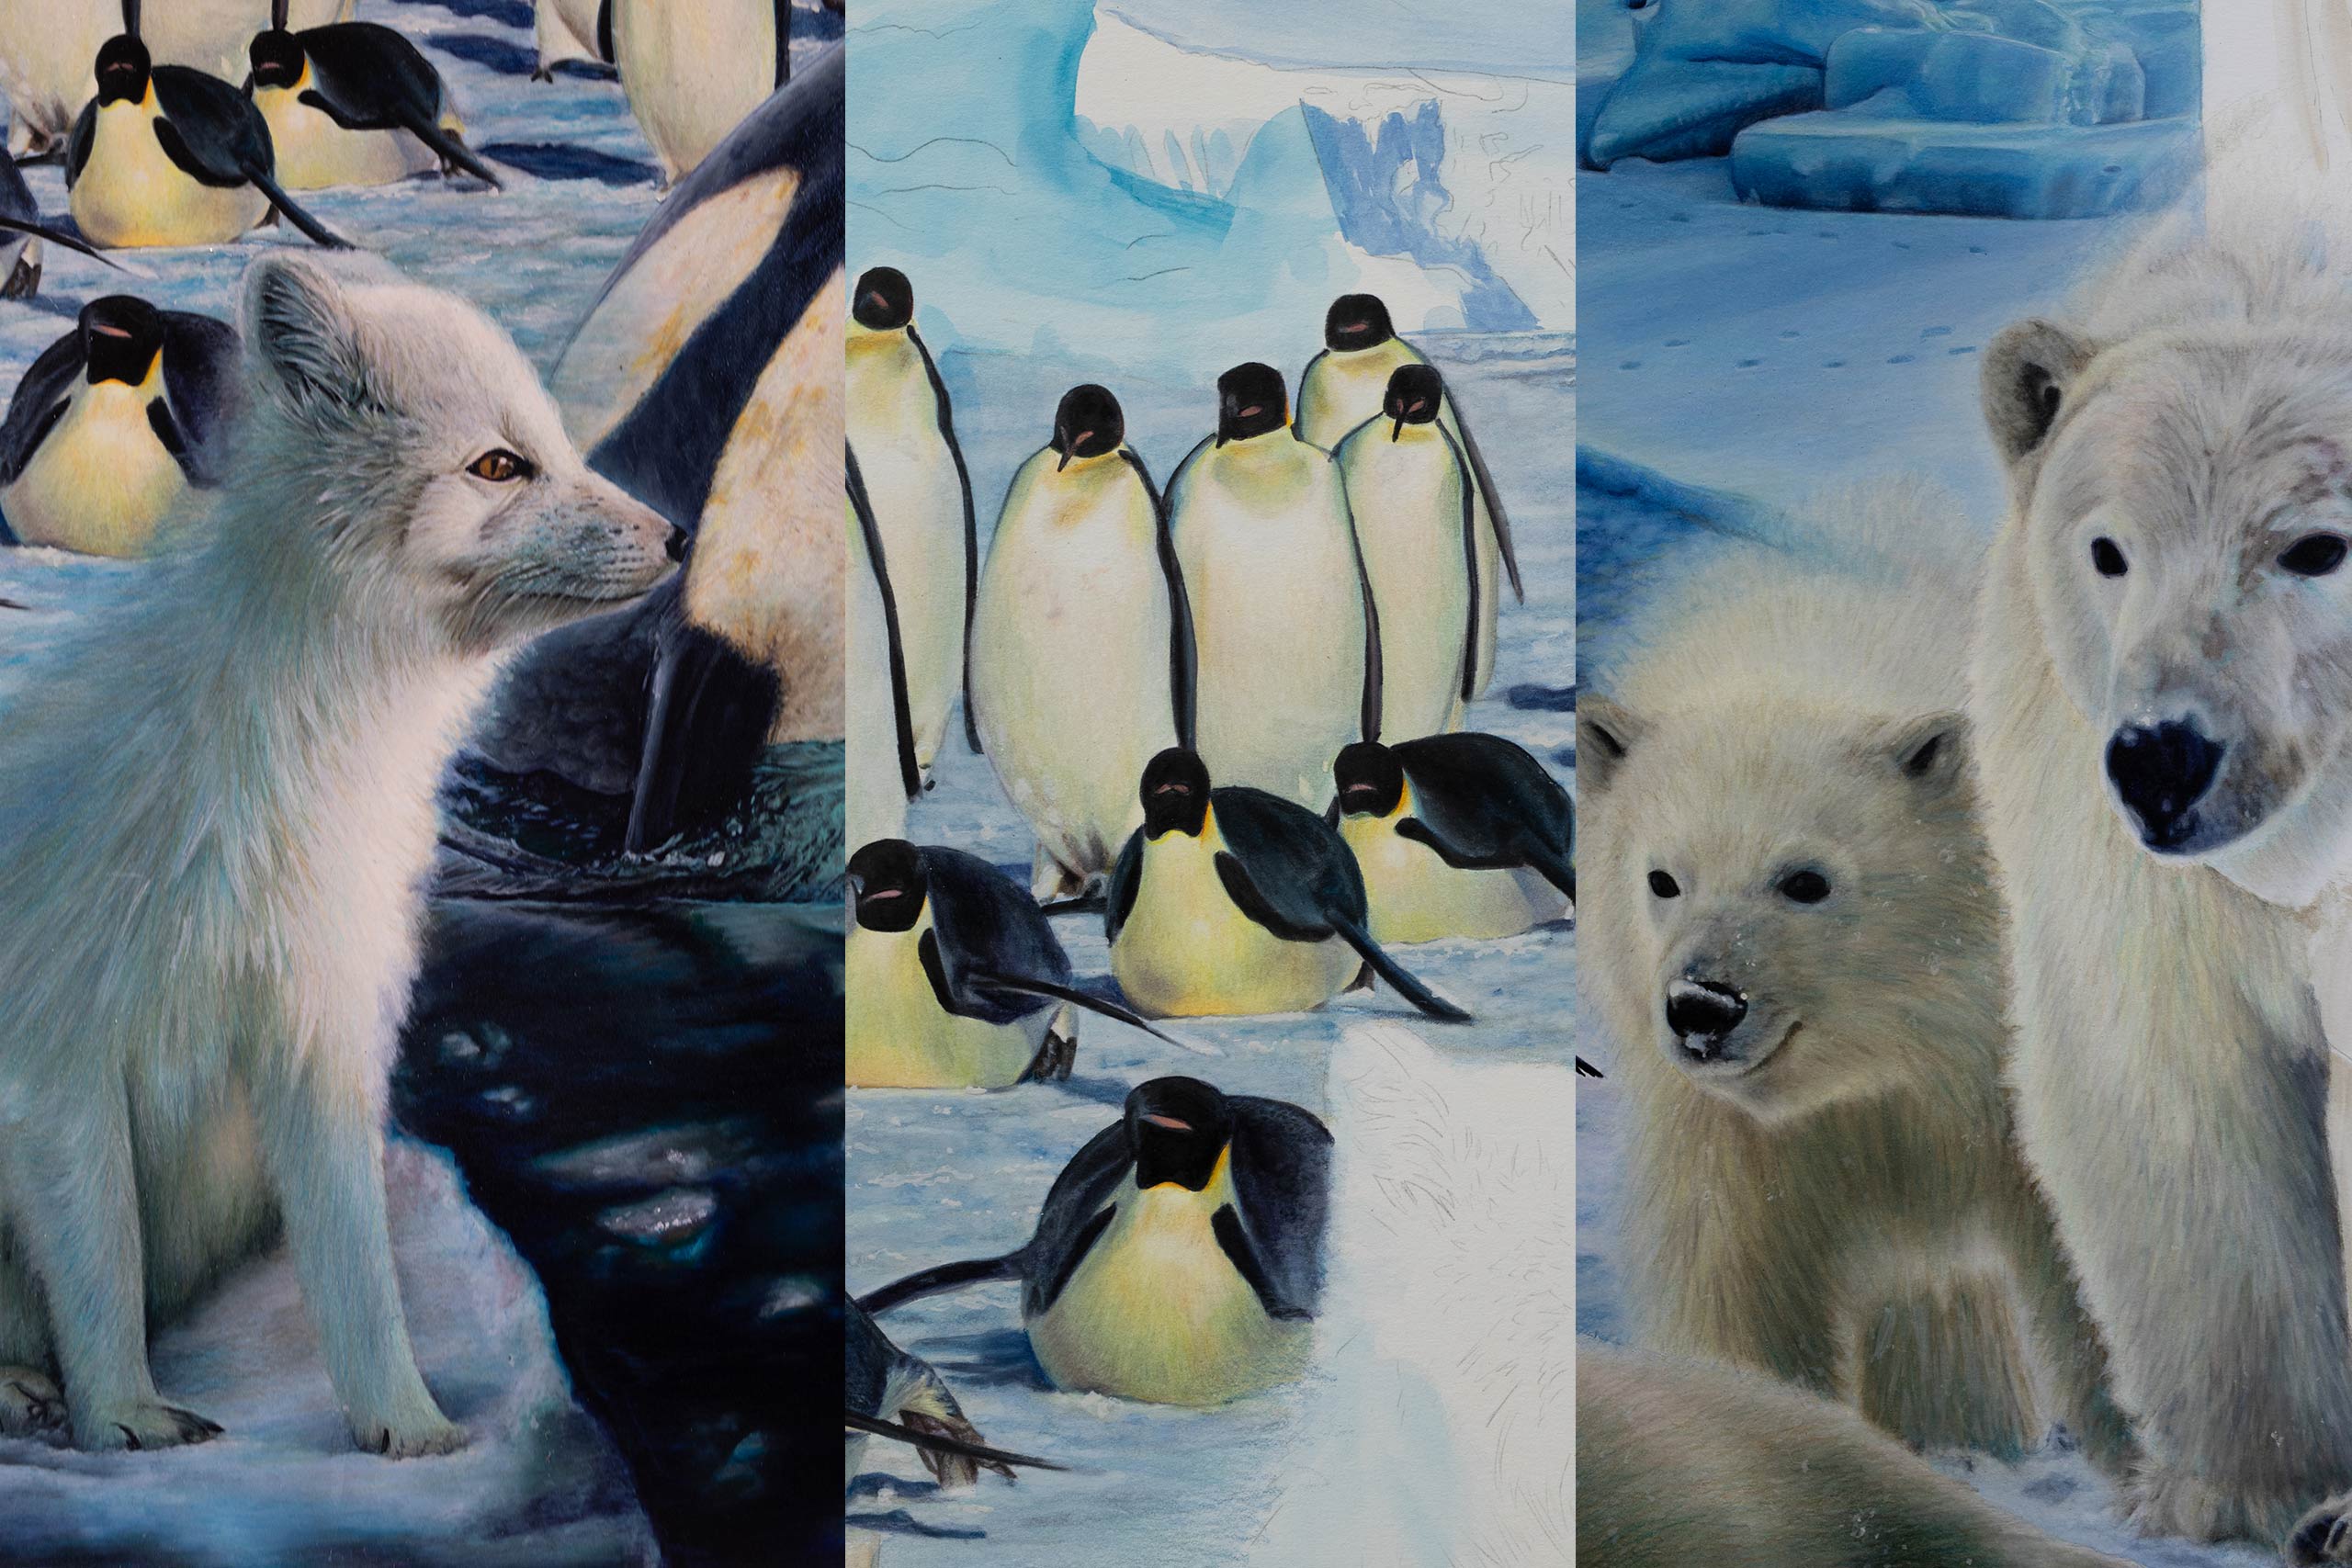 Mr Artic Fox, Polar Bear Mother and Cub, Emperor Penguins: The March